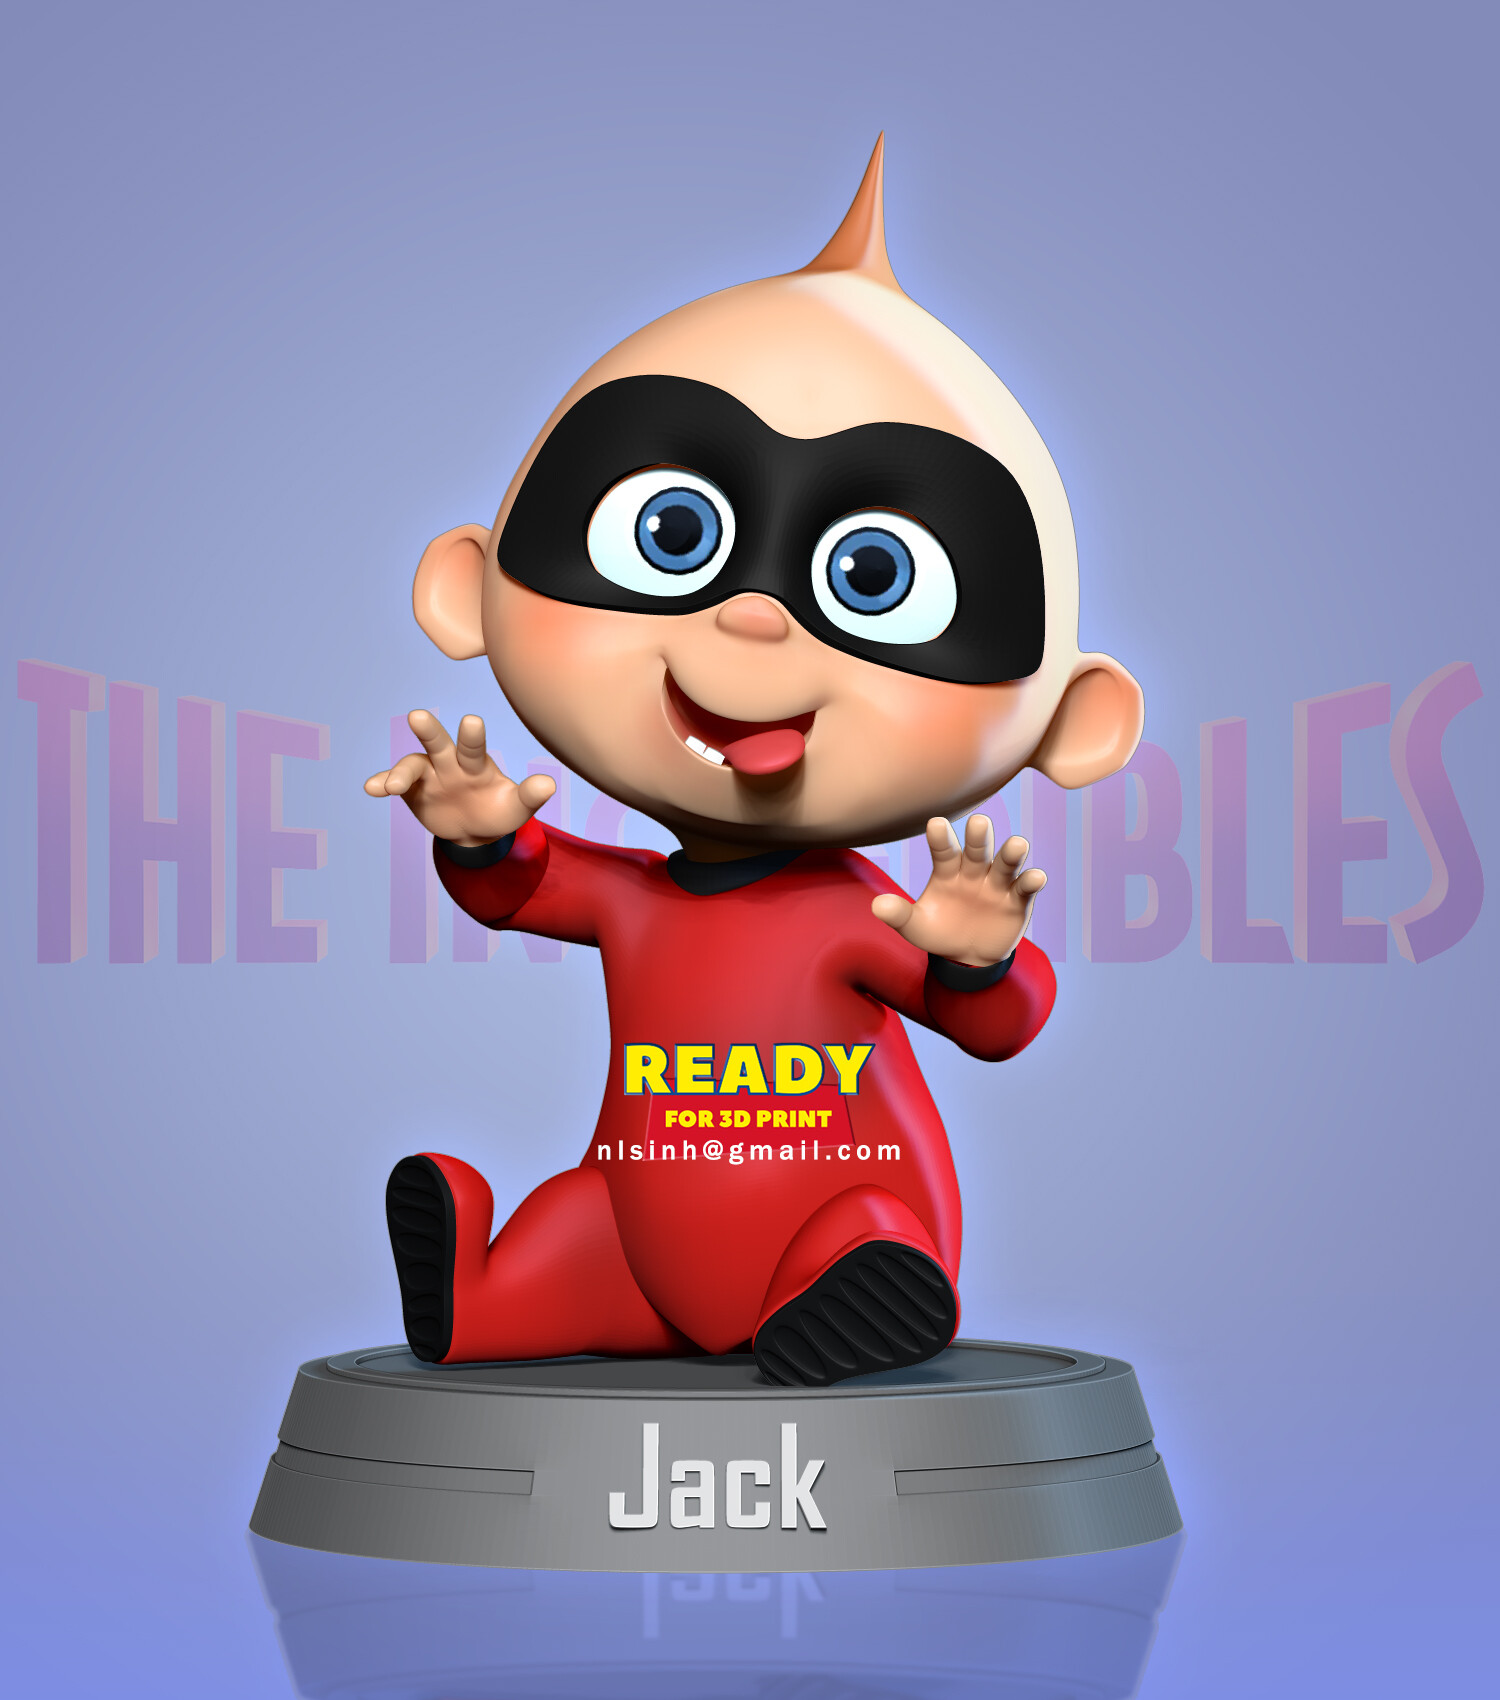 Jack Jack Parr And Dash In The Incredibles 2 Artwork Wallpapers